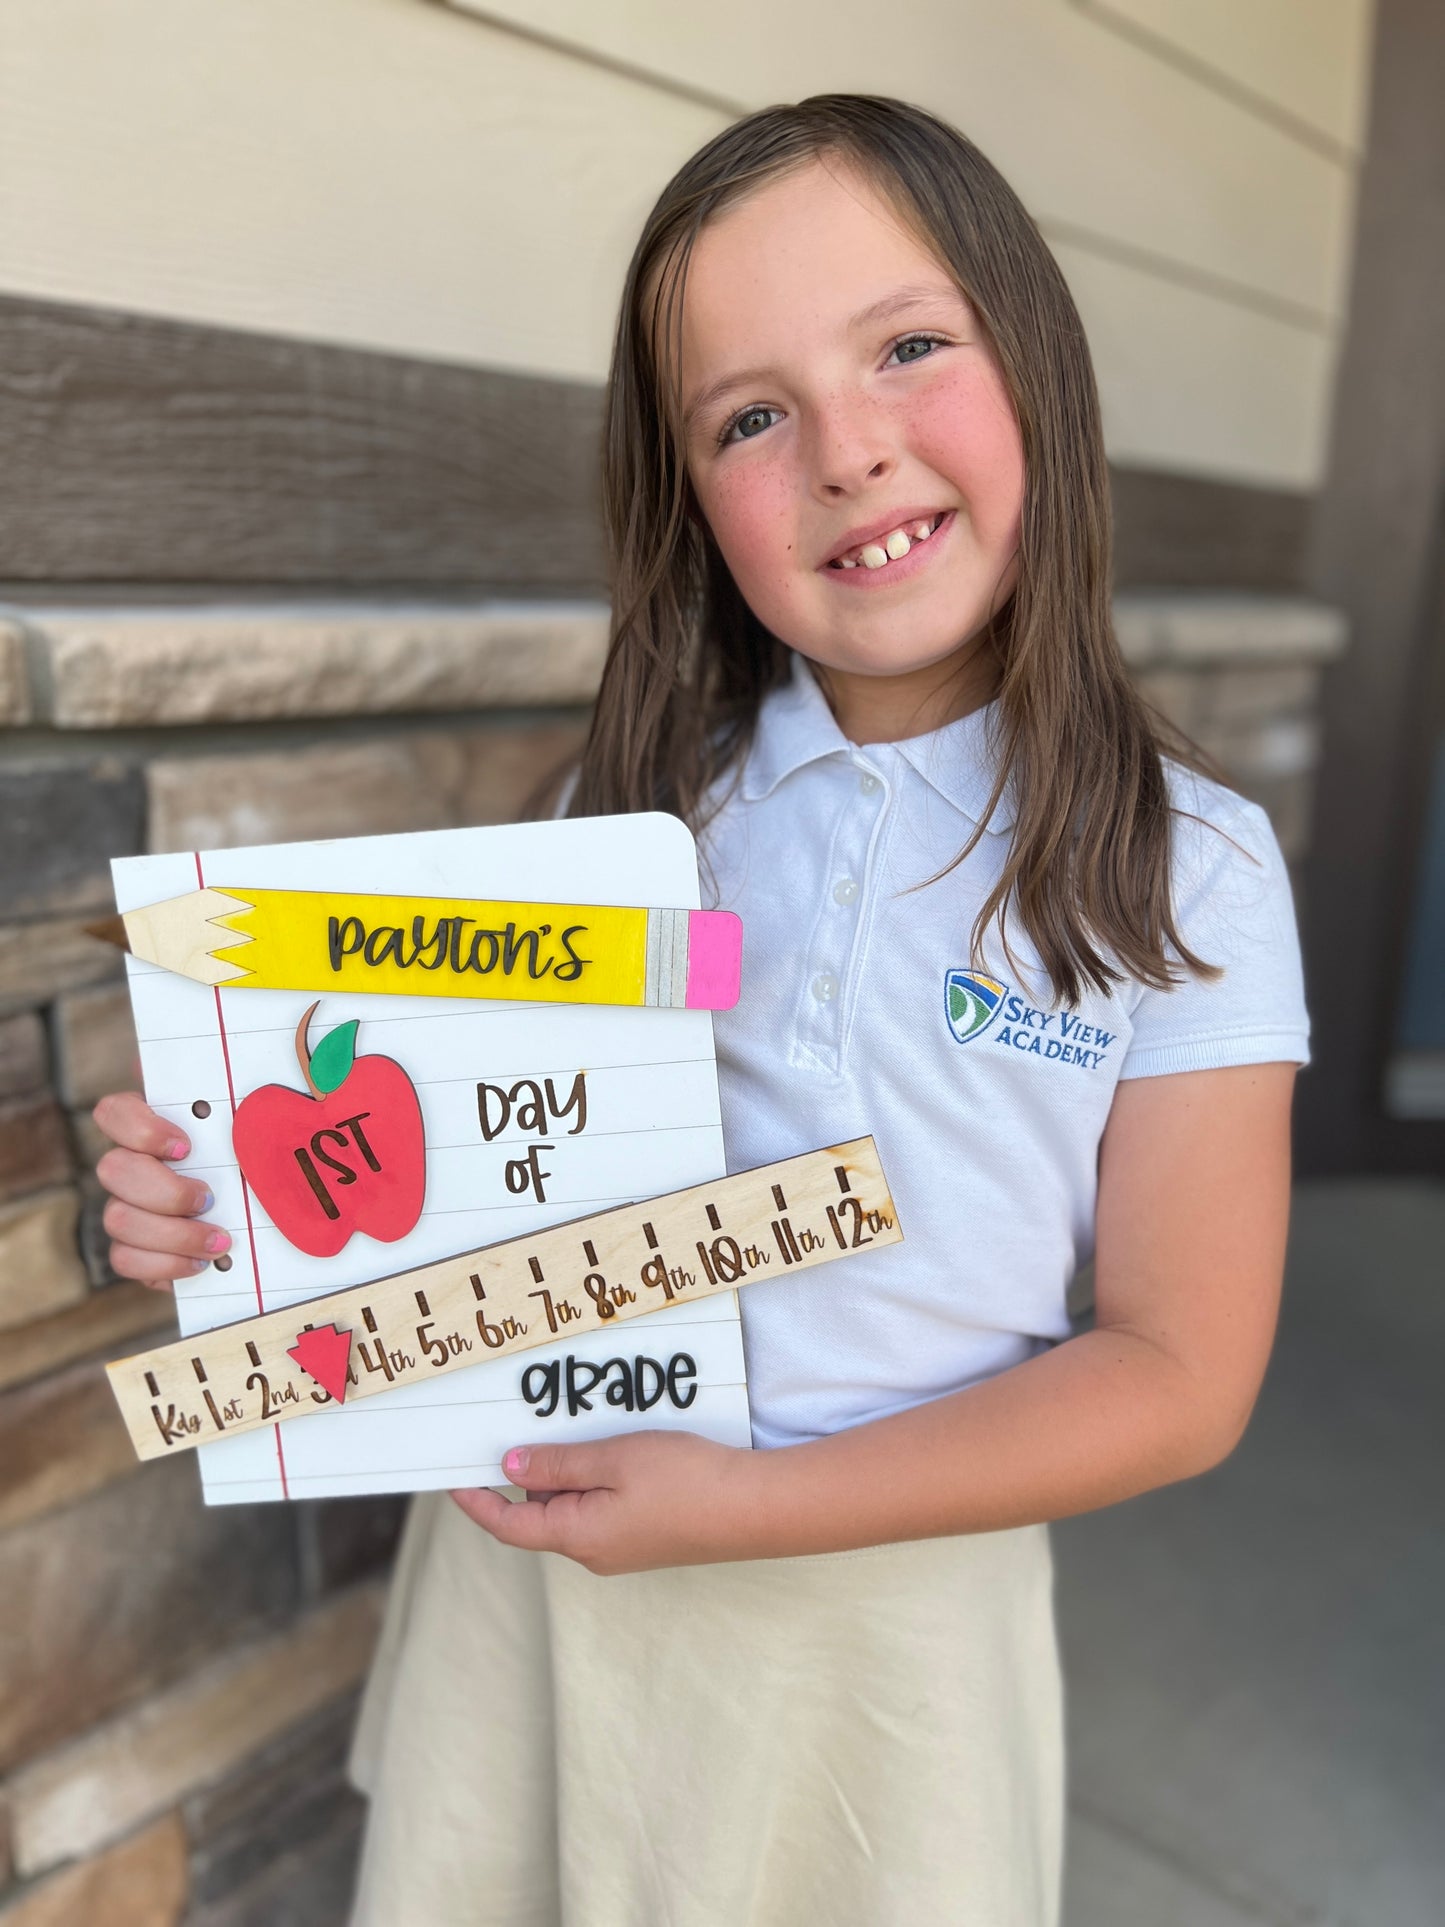 1st/last/100th day of school sign